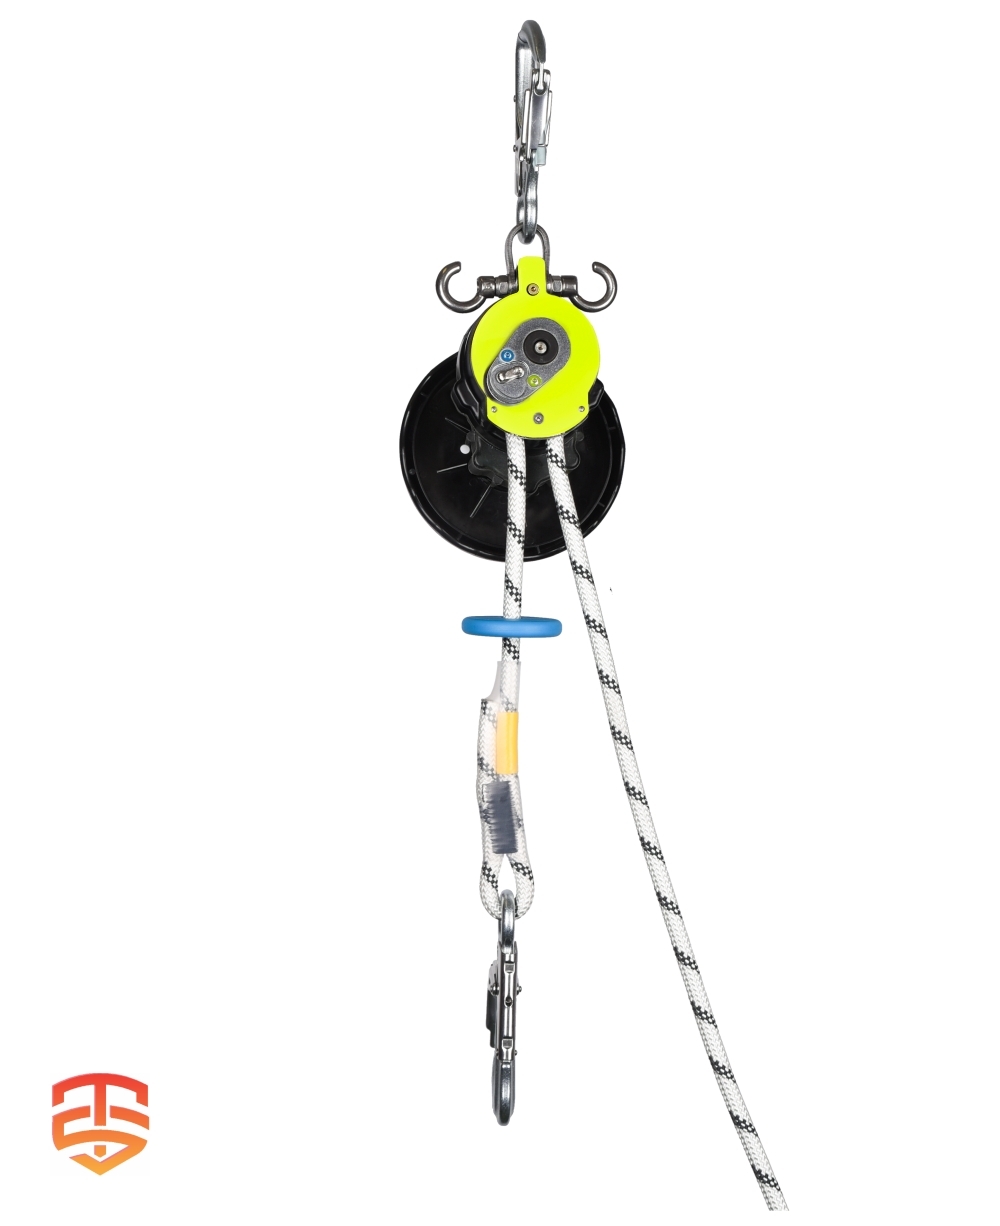 Buy the Edelrid Hot Knife Rope Cutter - Competitive Pricing, Worldwide  Delivery and Global Support